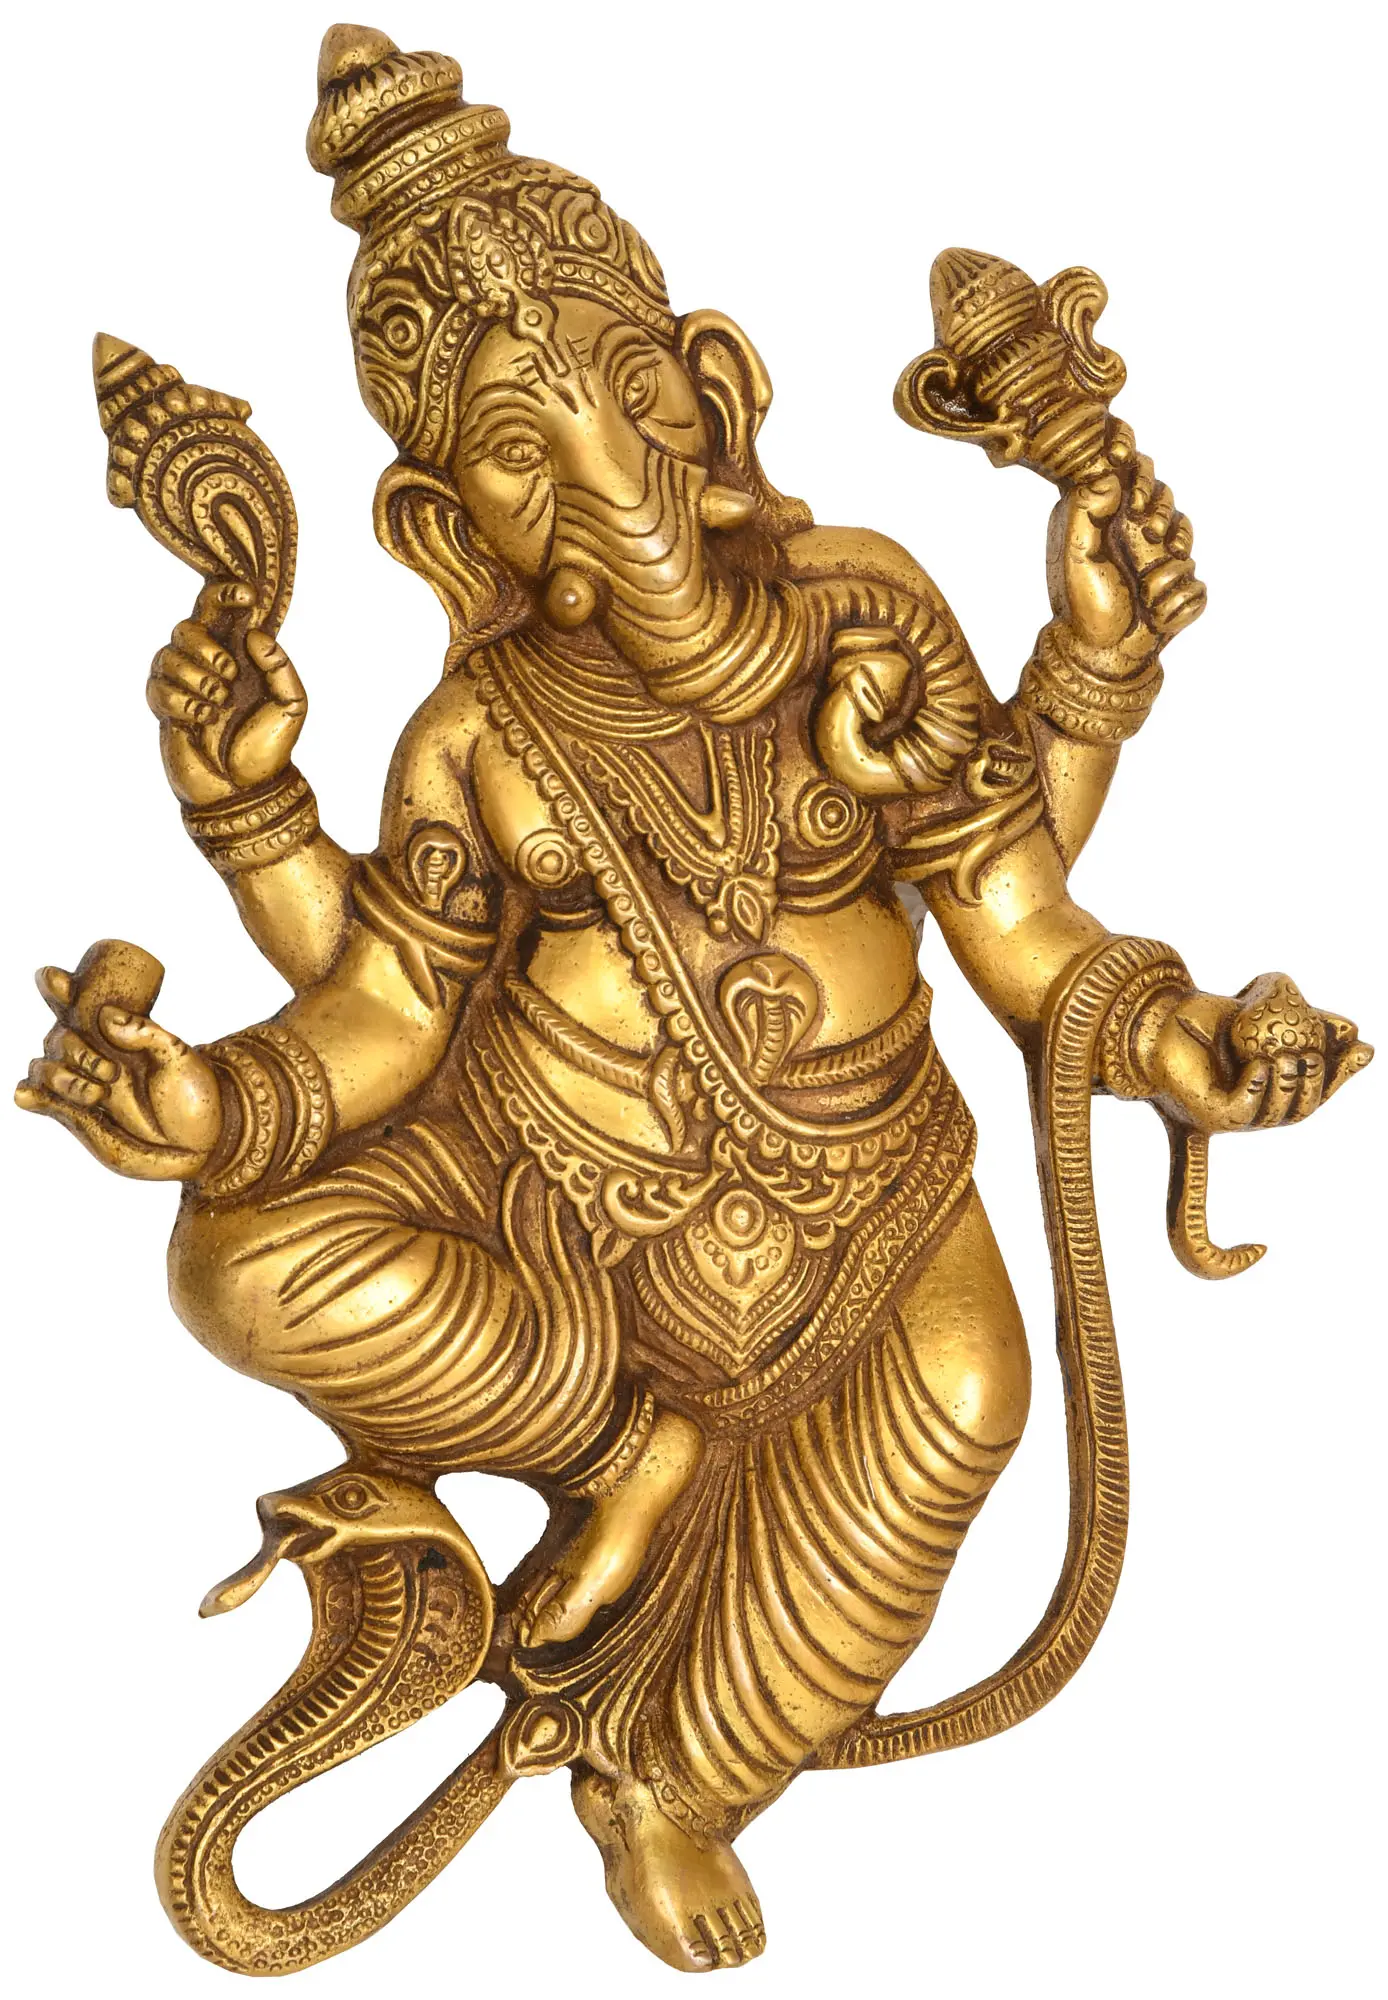 BHARAT HAAT Lord Ganesh's Three Side Facing Statue Made of Brass Metal BH01030 